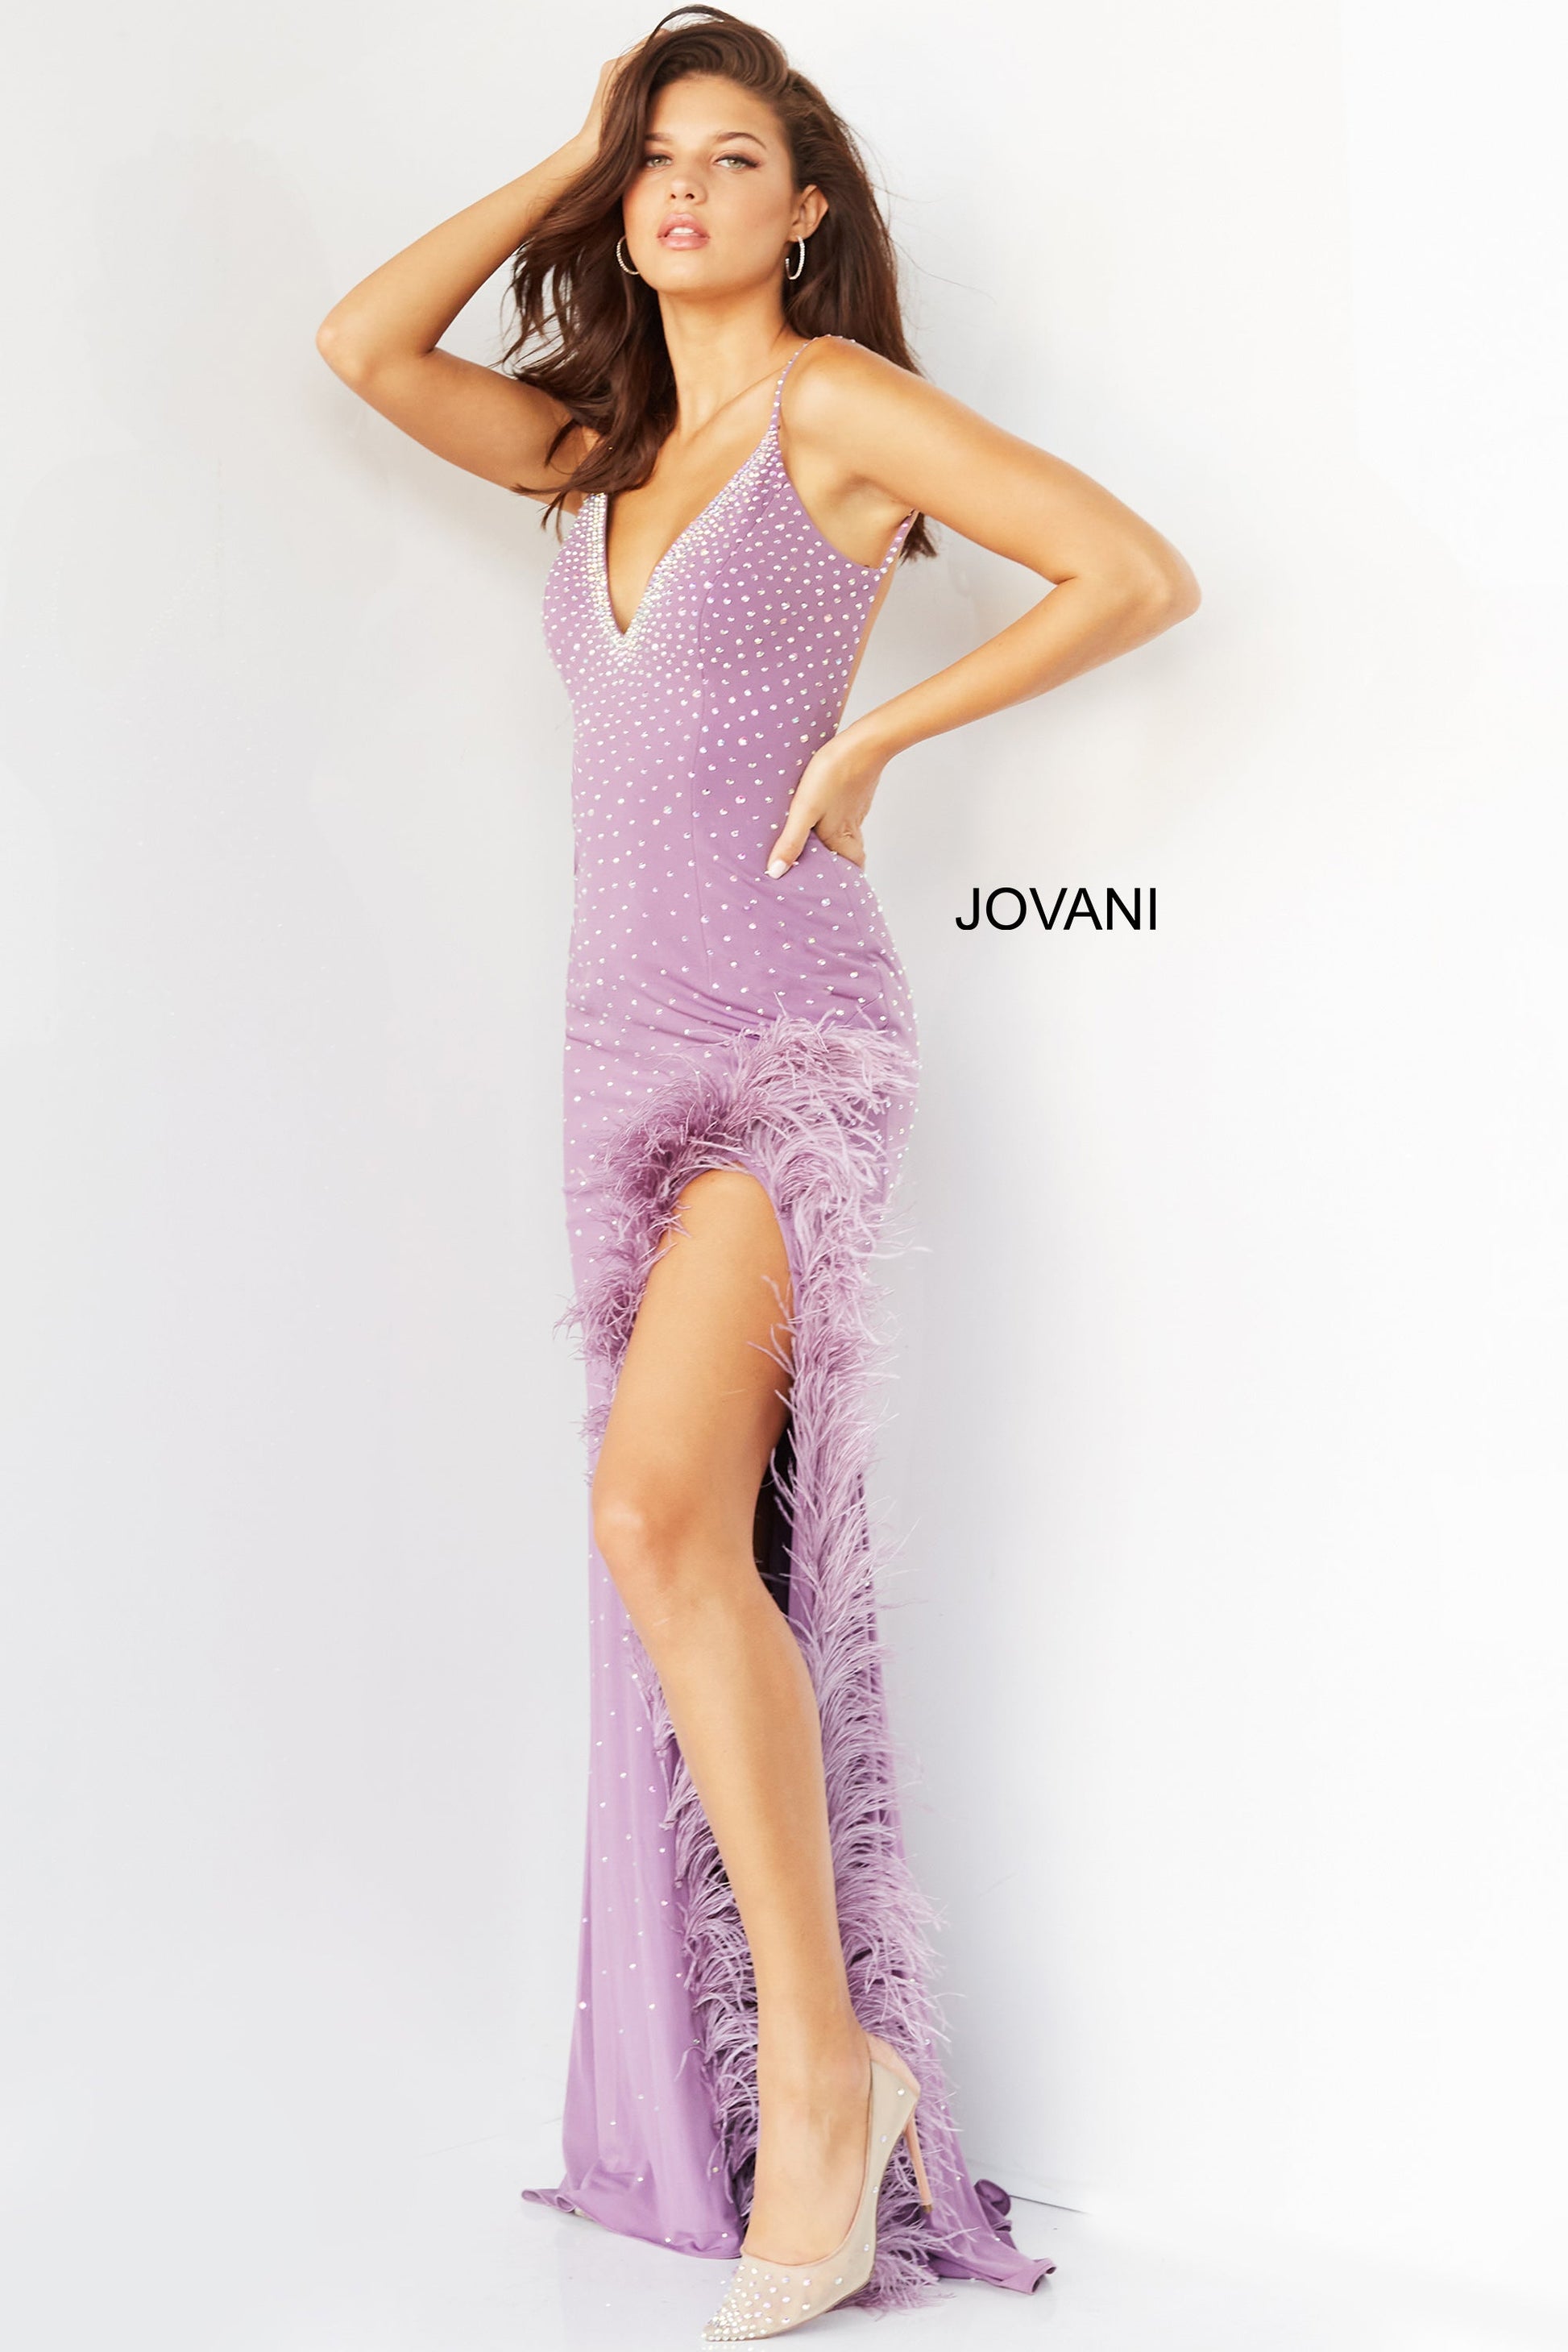 Jovani 08283  Prom, Pageant and Formal Evening Wear Dress.  This extravagant evening gown has a v neckline and low back.  It is fitted and beaded with a feather trimmed slit. Make a statement in this stand out prom dress.